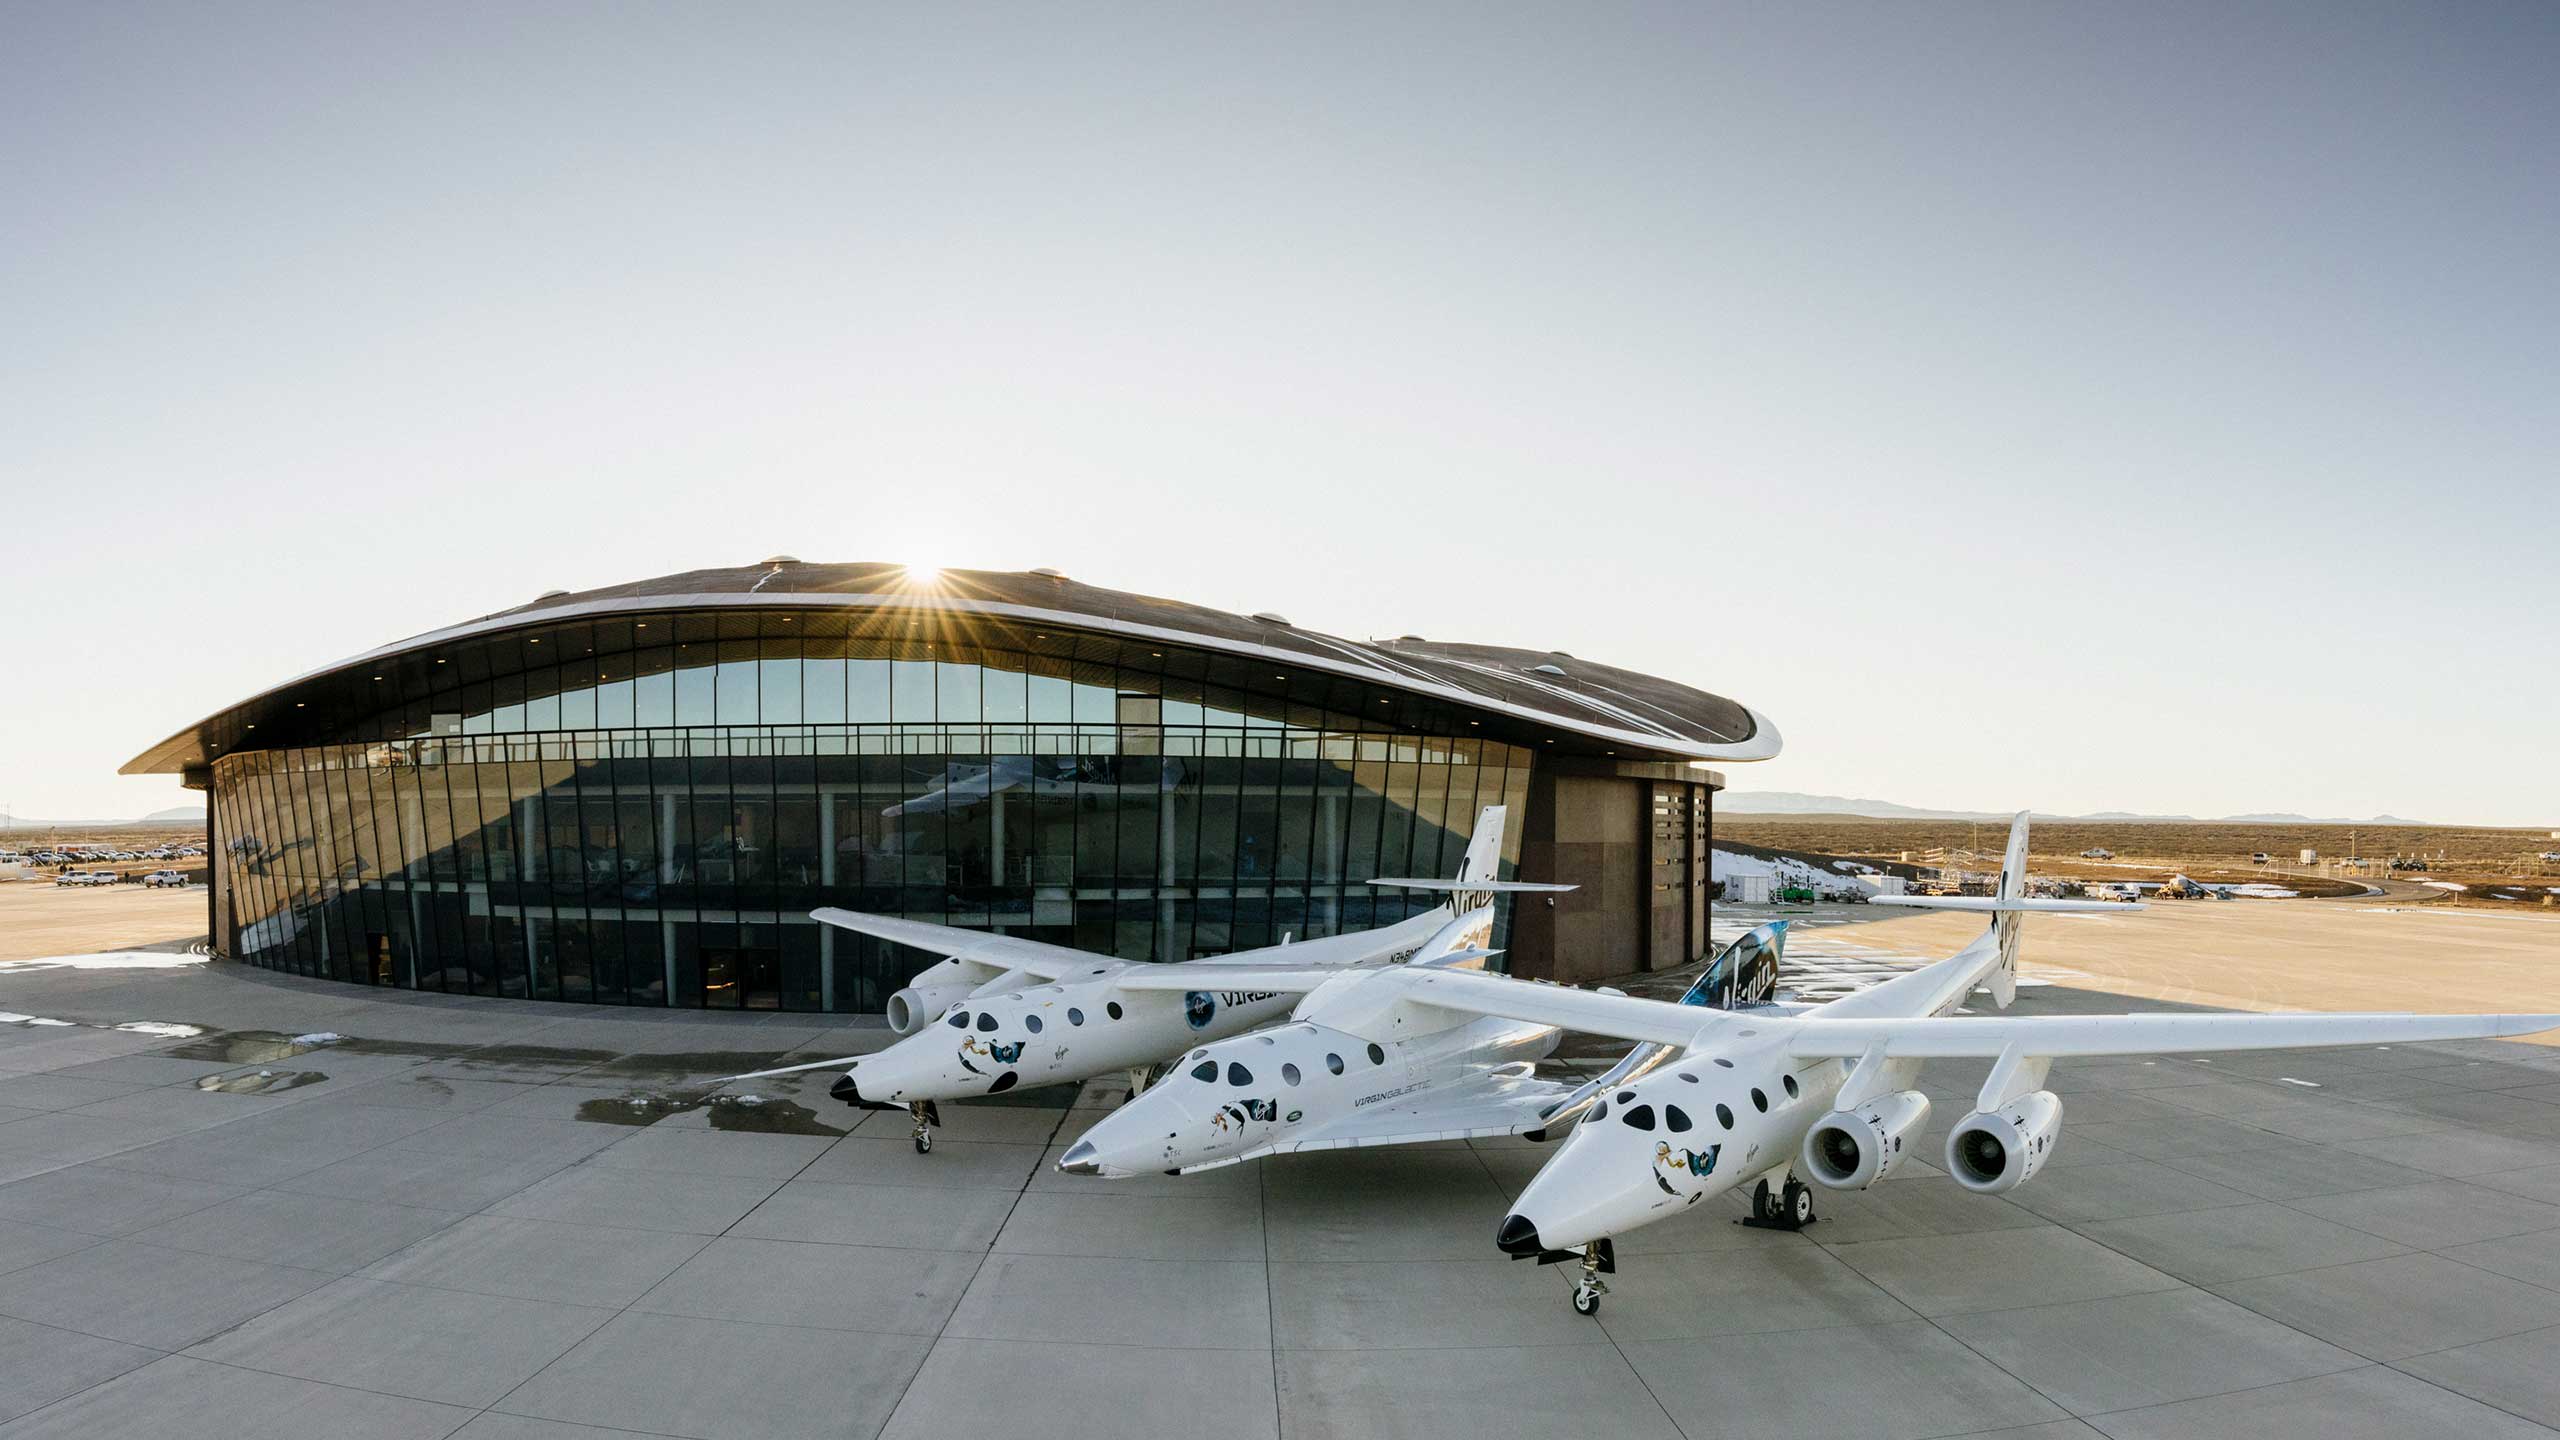 Every spaceport is $1 billion annual income alternative